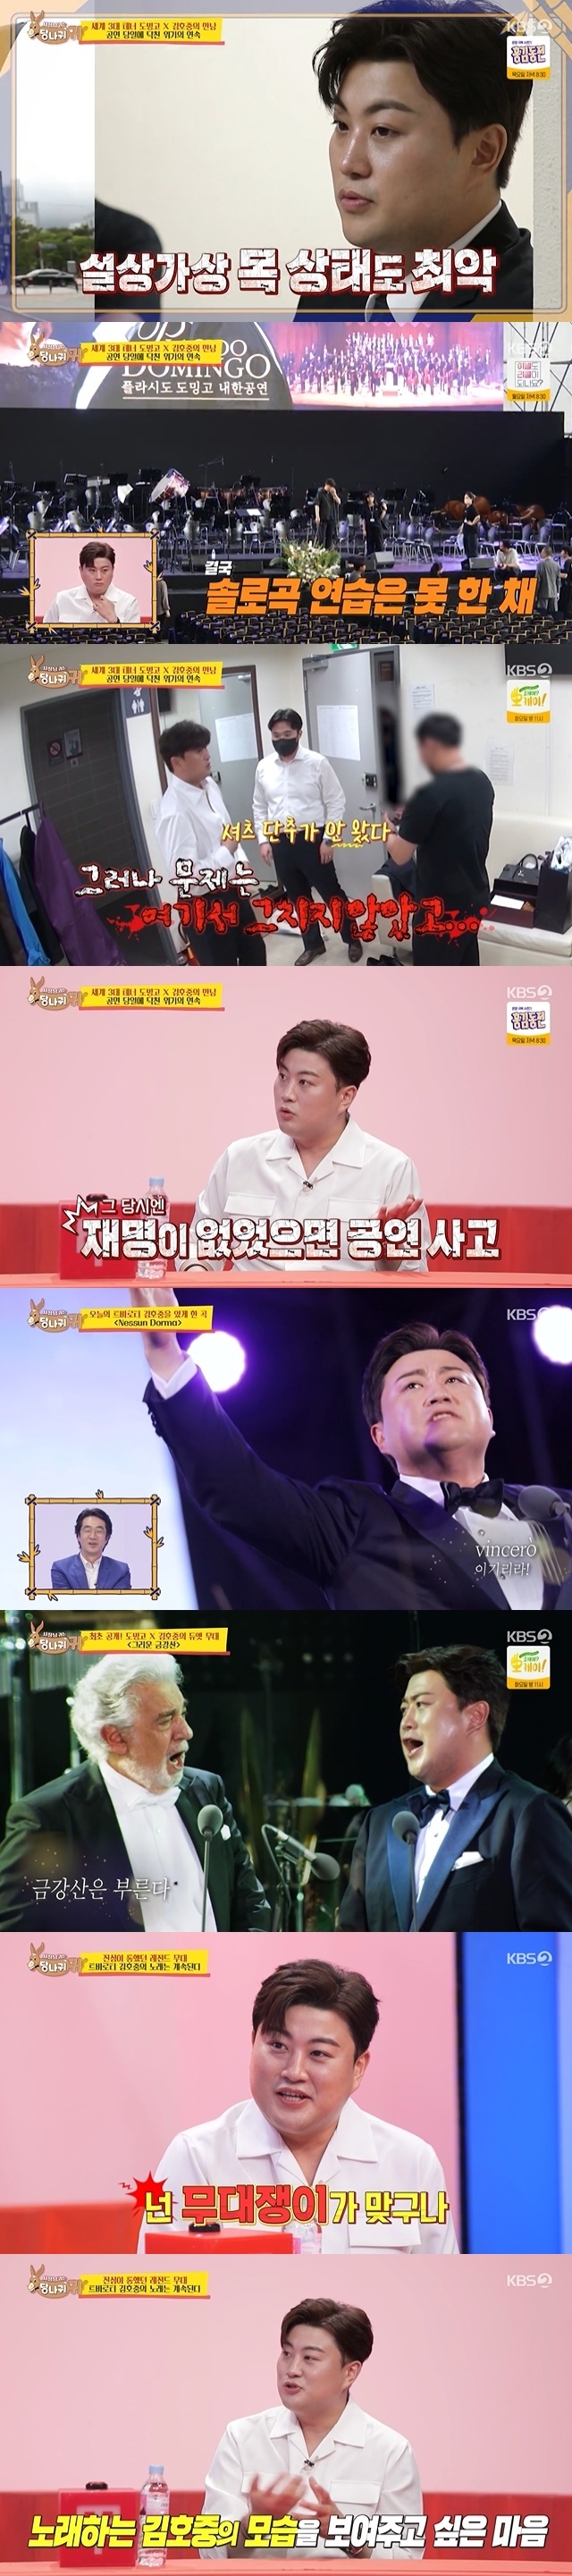 Kim Ho-joong gave a meaningful impression of the performance over the bad news such as Great season, rehearsal suspension, and loss of costume.In the 167th KBS 2TV entertainment Boss in the Mirror (hereinafter referred to as Donkey Ear) broadcast on July 31, Kim Ho-joong, who was hit by Danger, was portrayed ahead of his performance with Domingo, the worlds top three tenor.Kim Ho-joong, who had to suffer all kinds of bad news until the sudden rehearsal suspension last week in the Great Season, was hit by another ordeal before he took the stage.I didnt have a button on my shirt, he said, panicking, if I dont, I have to wear your clothes, he told friend Lee Jae-myung.Lee Jae-myung also said, What is this case ... and expressed his absurdity, but he said, I am trying to be good today.Then, as I took off my clothes, I shivered, I am more comfortable with this.Kim Ho-joong told MCs who were wondering about the specific situation, I made a cuff button, not just a button, just like an orthodox classic.There was a case with cuffs in it - that was all gone, he explained.I can laugh now, but if I did not have a re-name at this time, it was a real big thing, a real accident. (Ungood) I just thought I would leave my neck to the sky, he said.Nevertheless, Kim Ho-joong successfully performed the Duets stage with Placido Domingo and his solo stage.Kim Ho-joong said, I want to talk about it if I have a heart, but if I do not have a bad neck, if I really do the stage, I will have a hard time not knowing.It was a very happy time, Domingo said to Kim Ho-joong, Our stage was very good.Next time, lets join us with our Duets. Kim Sook asked, How did we endure crying when we were crying? Kim Ho-joong said, I am still crying. Renamed me, You are a staged man.This stage was possible because the rename came.I did not know that the button was missing as if I had written a script, but I found the button, and it was under the couch I was sitting on.When I was doing Nesun Dorma, the renaming took off my clothes, cuffed and sang, he said.